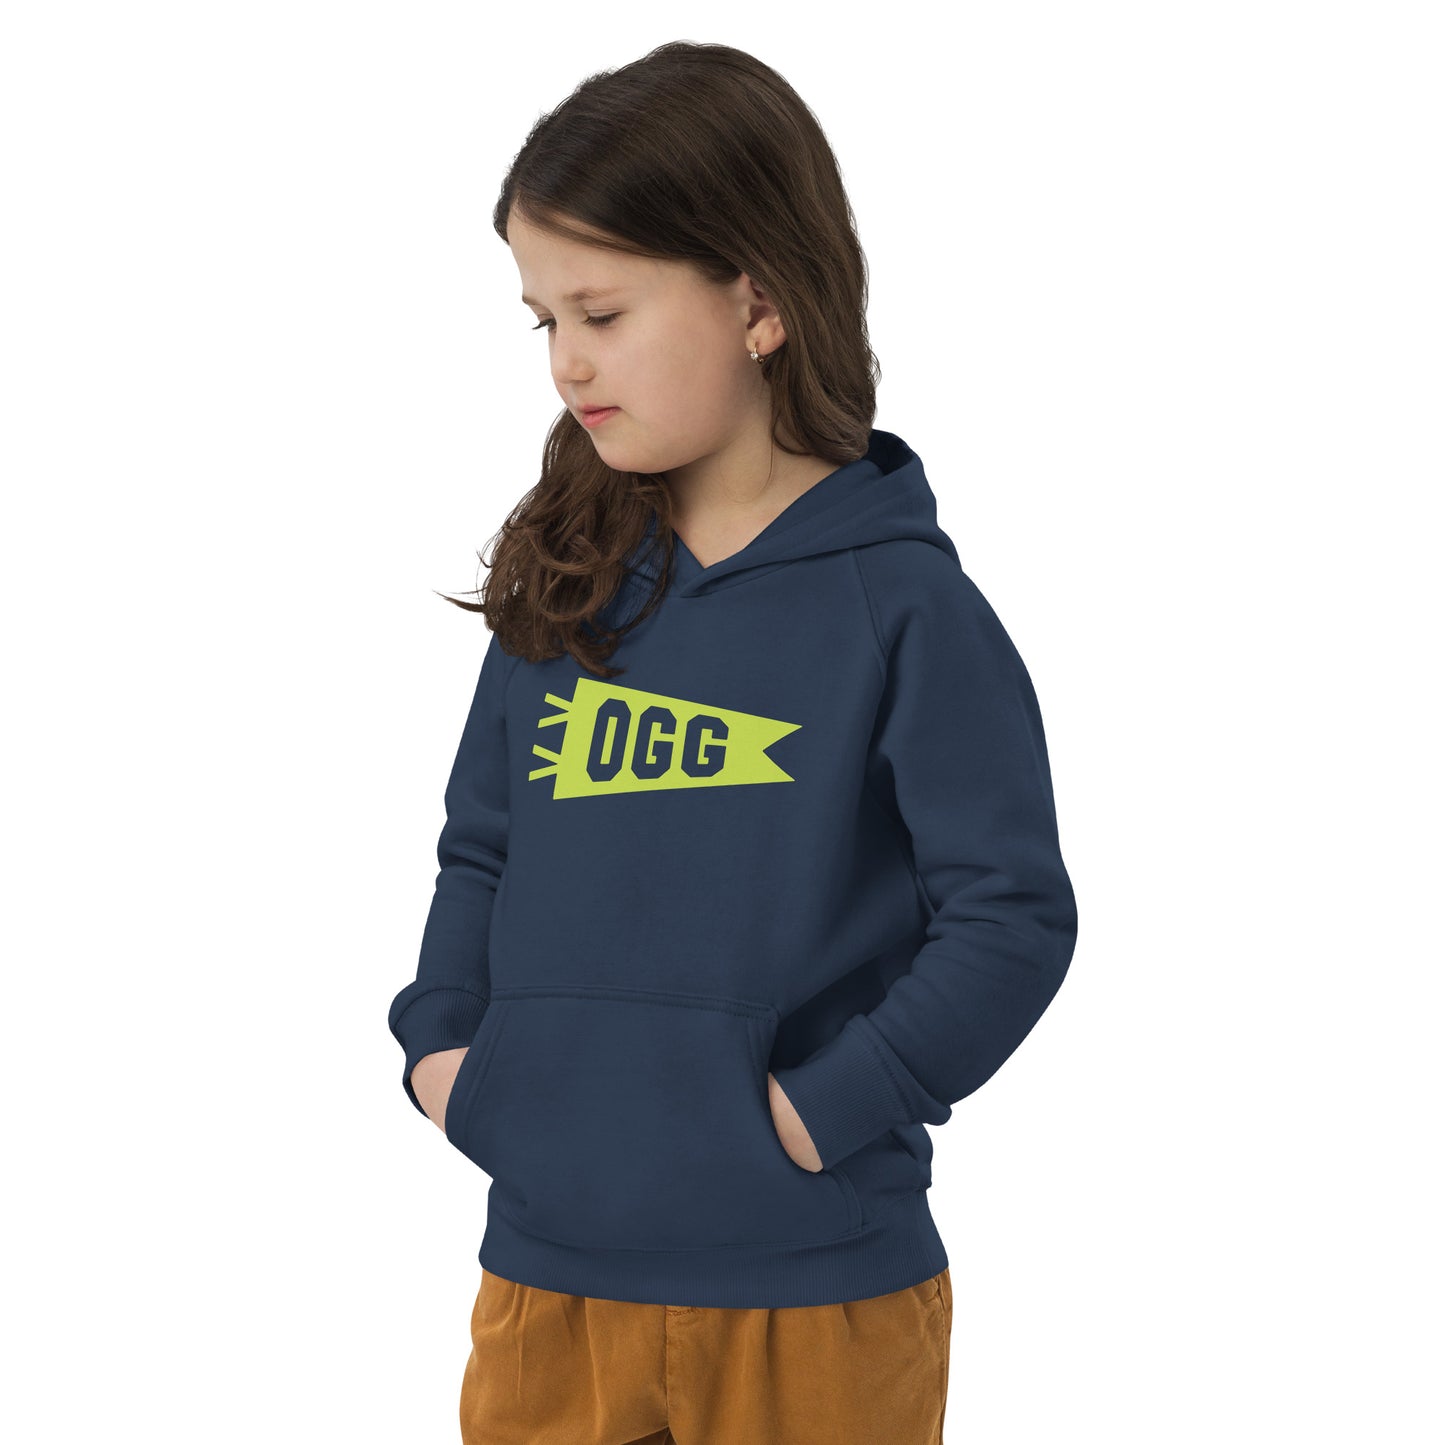 Kid's Sustainable Hoodie - Green Graphic • OGG Maui • YHM Designs - Image 05